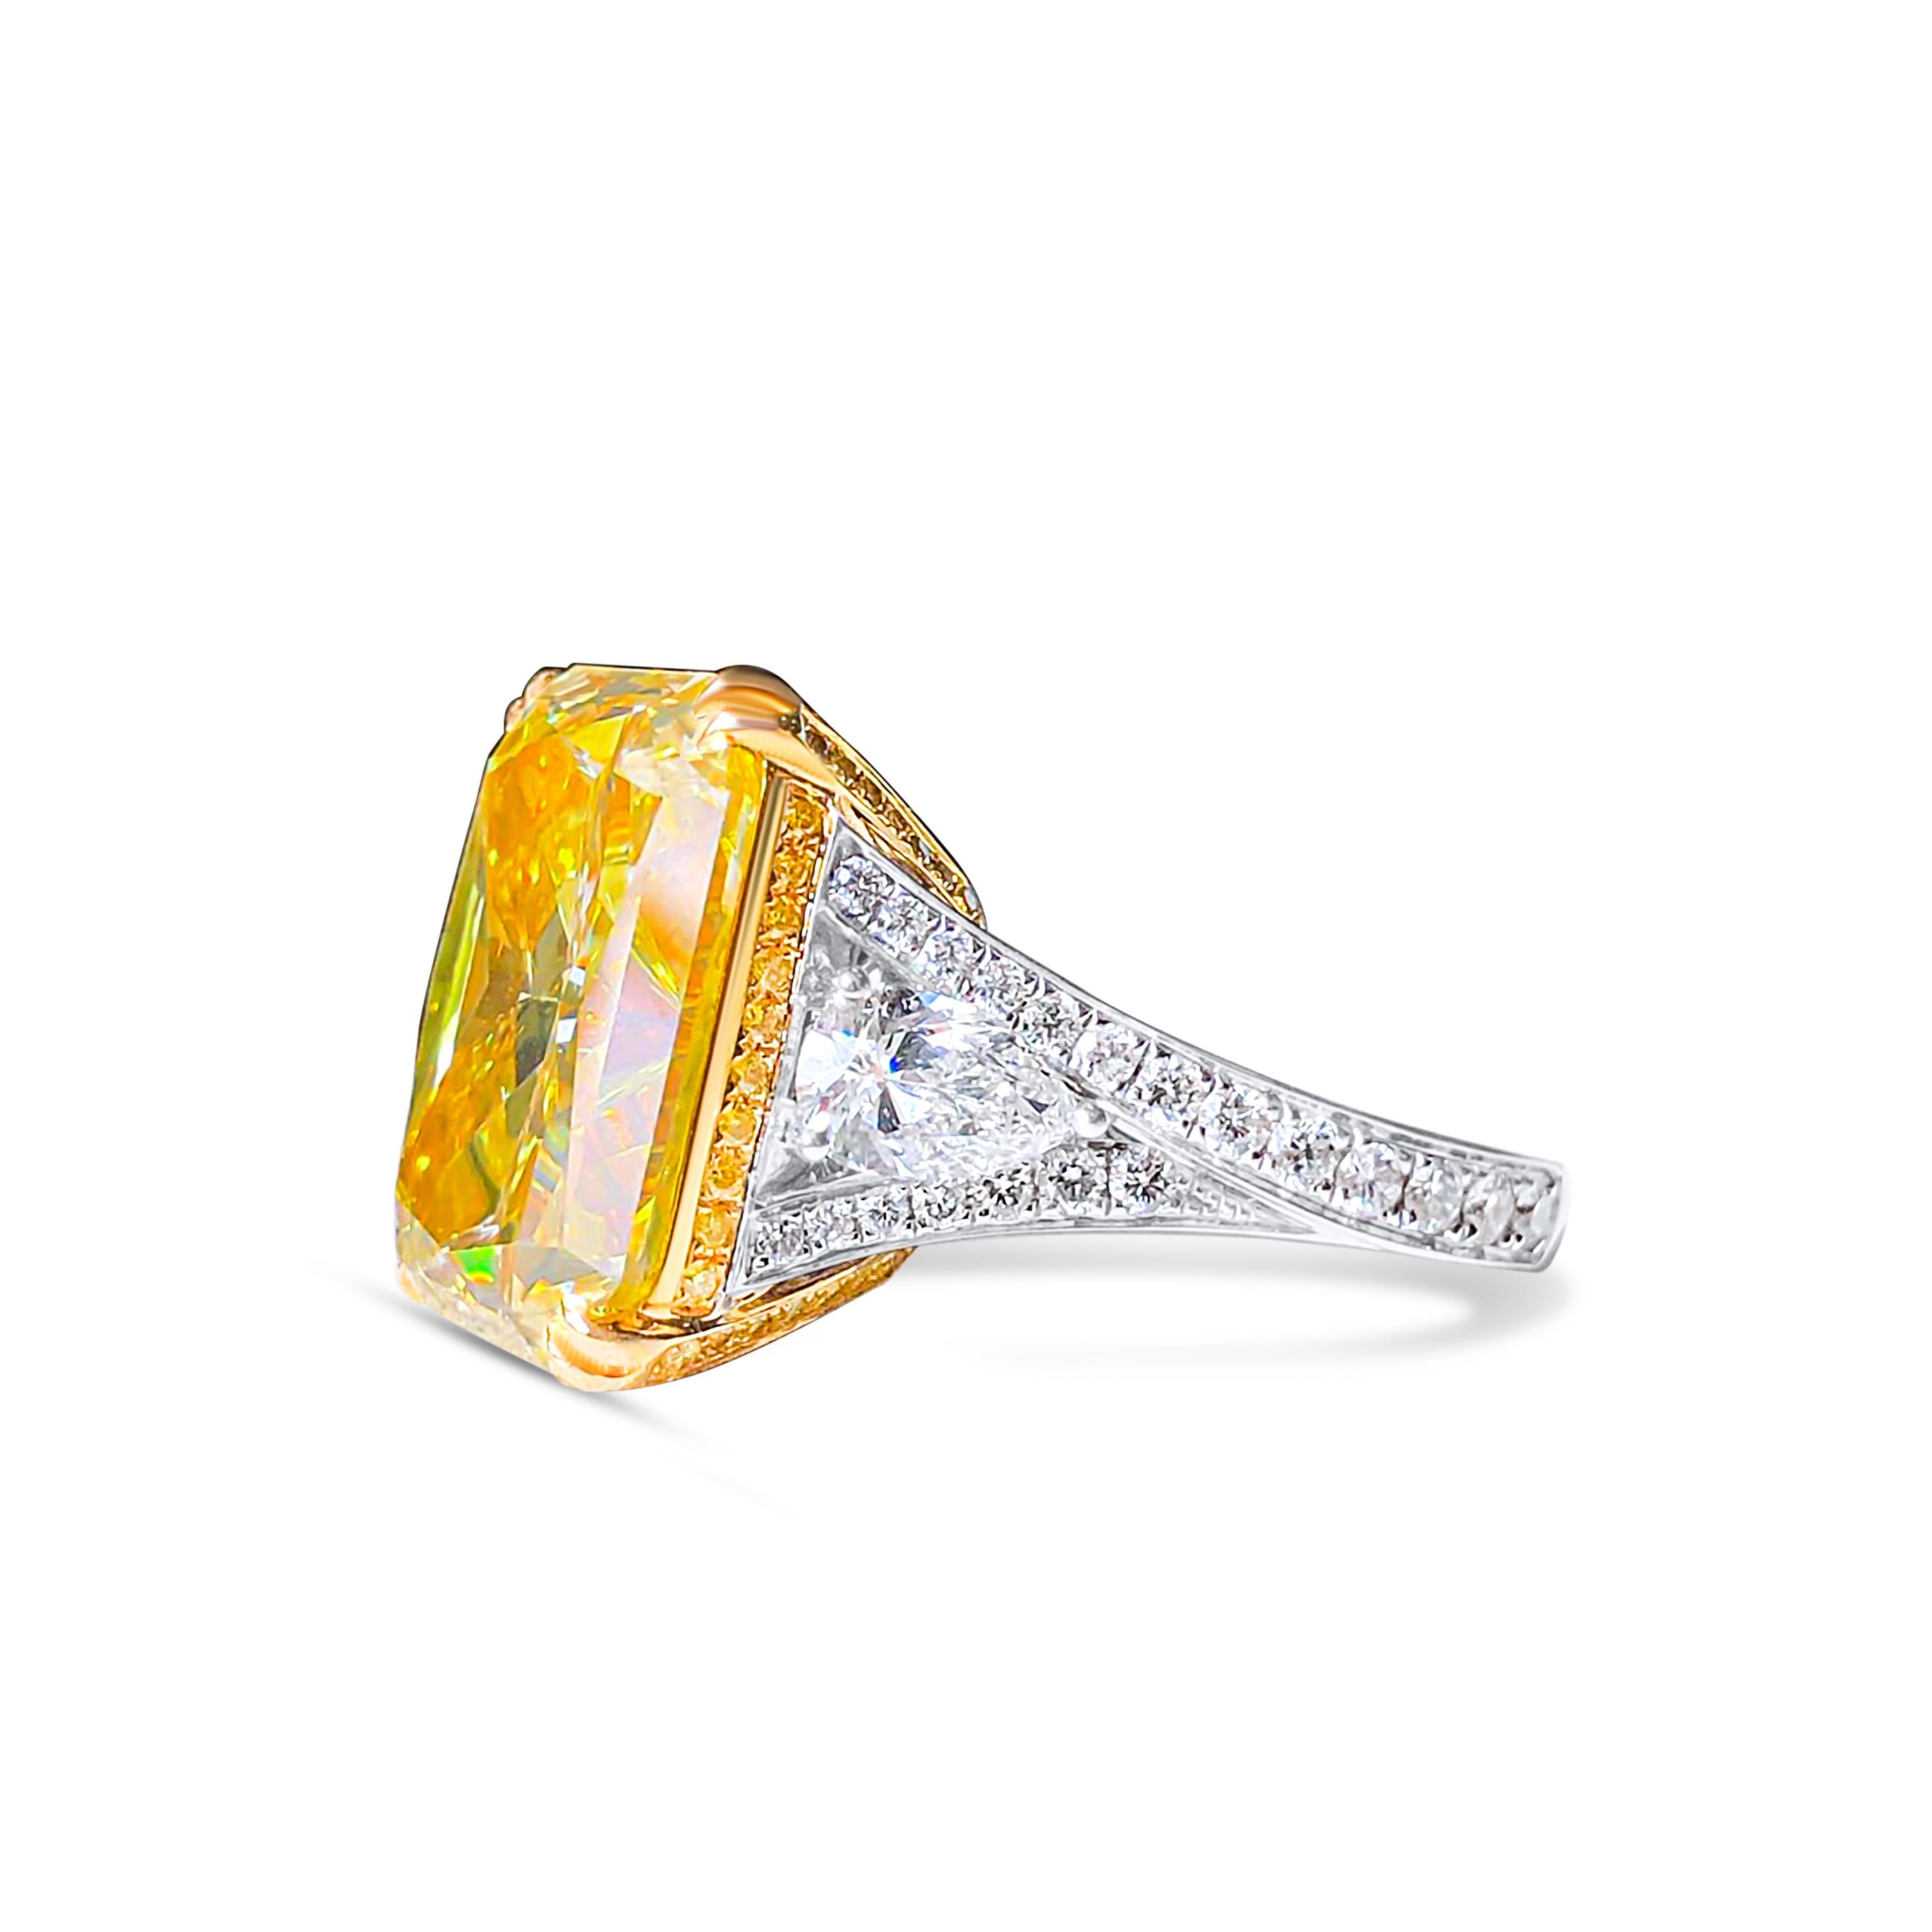 We invite you to discover this elegant engagement ring set with a cushion Fancy Light Brownish Yellow diamond of 20,06 carats certified GIA accented with colorless and yellow diamonds. 

New ring 
Main diamond: Fancy Light Brownish Yellow 20,06